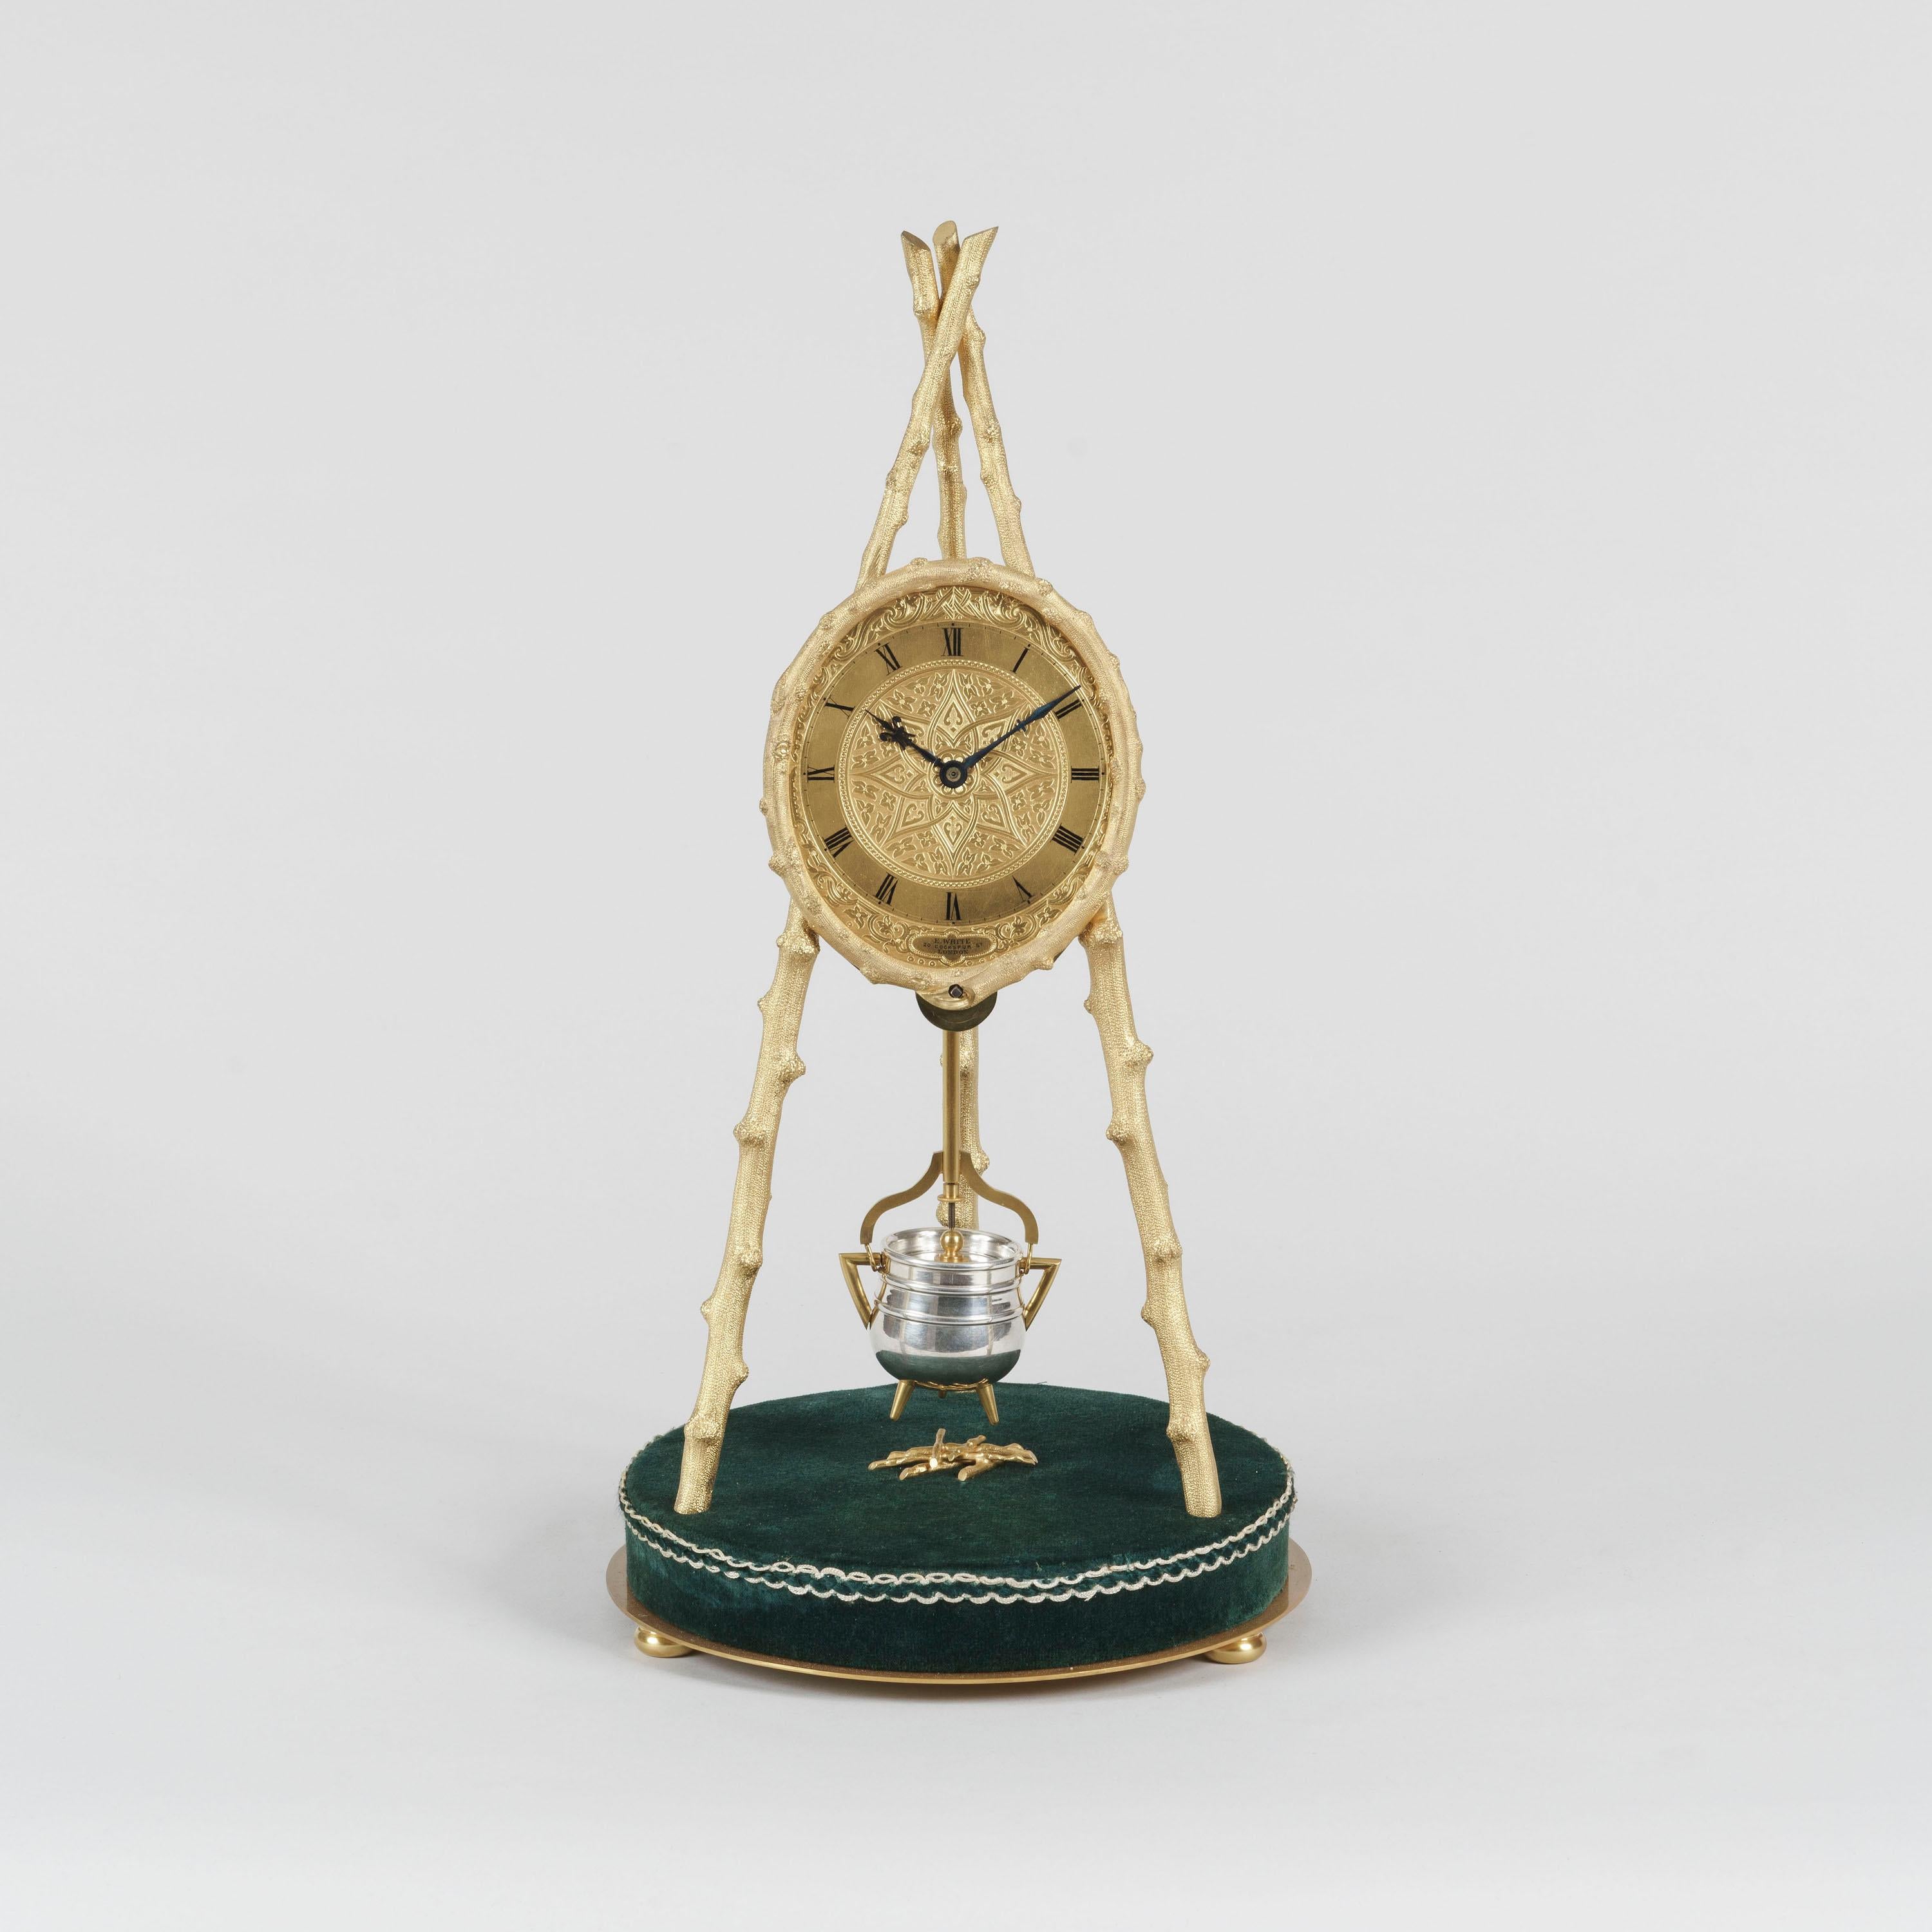 An extraordinary rustic tripod table clock
by Thomas Cole
Retailed by E. White of London

The circular green velvet-clad base supporting three equidistantly spaced brass imitation logs, from which the clock and its mechanism are suspended;